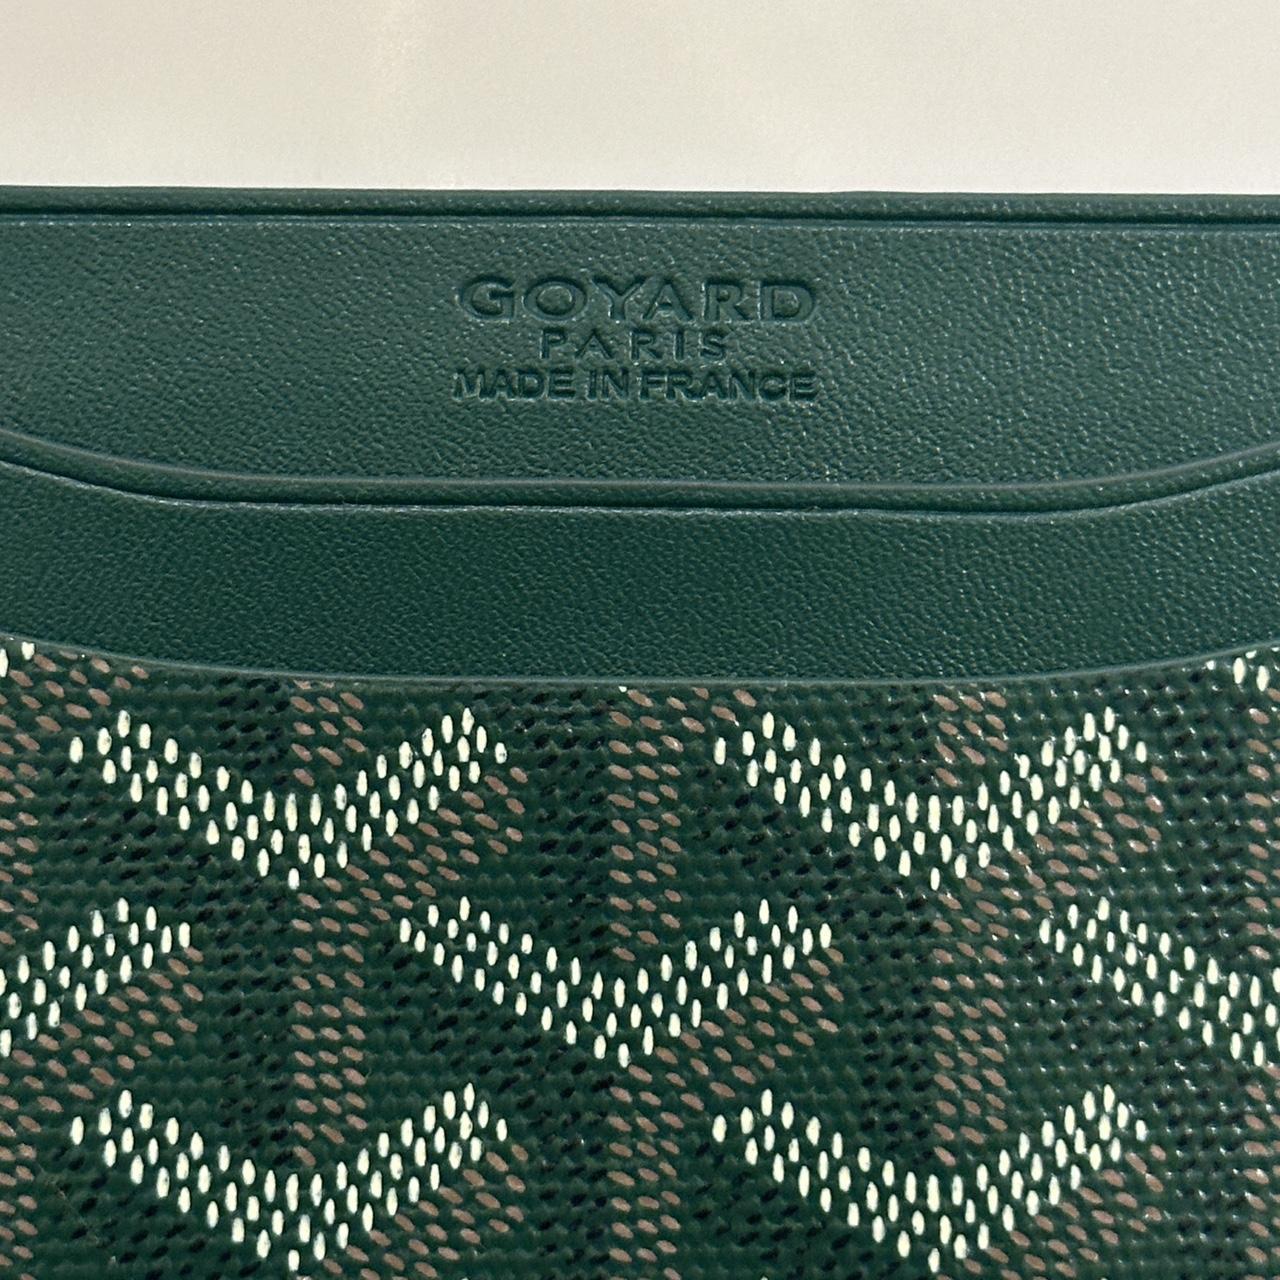 Goyard Blue St. Suplice Comes with Box Purchased - Depop